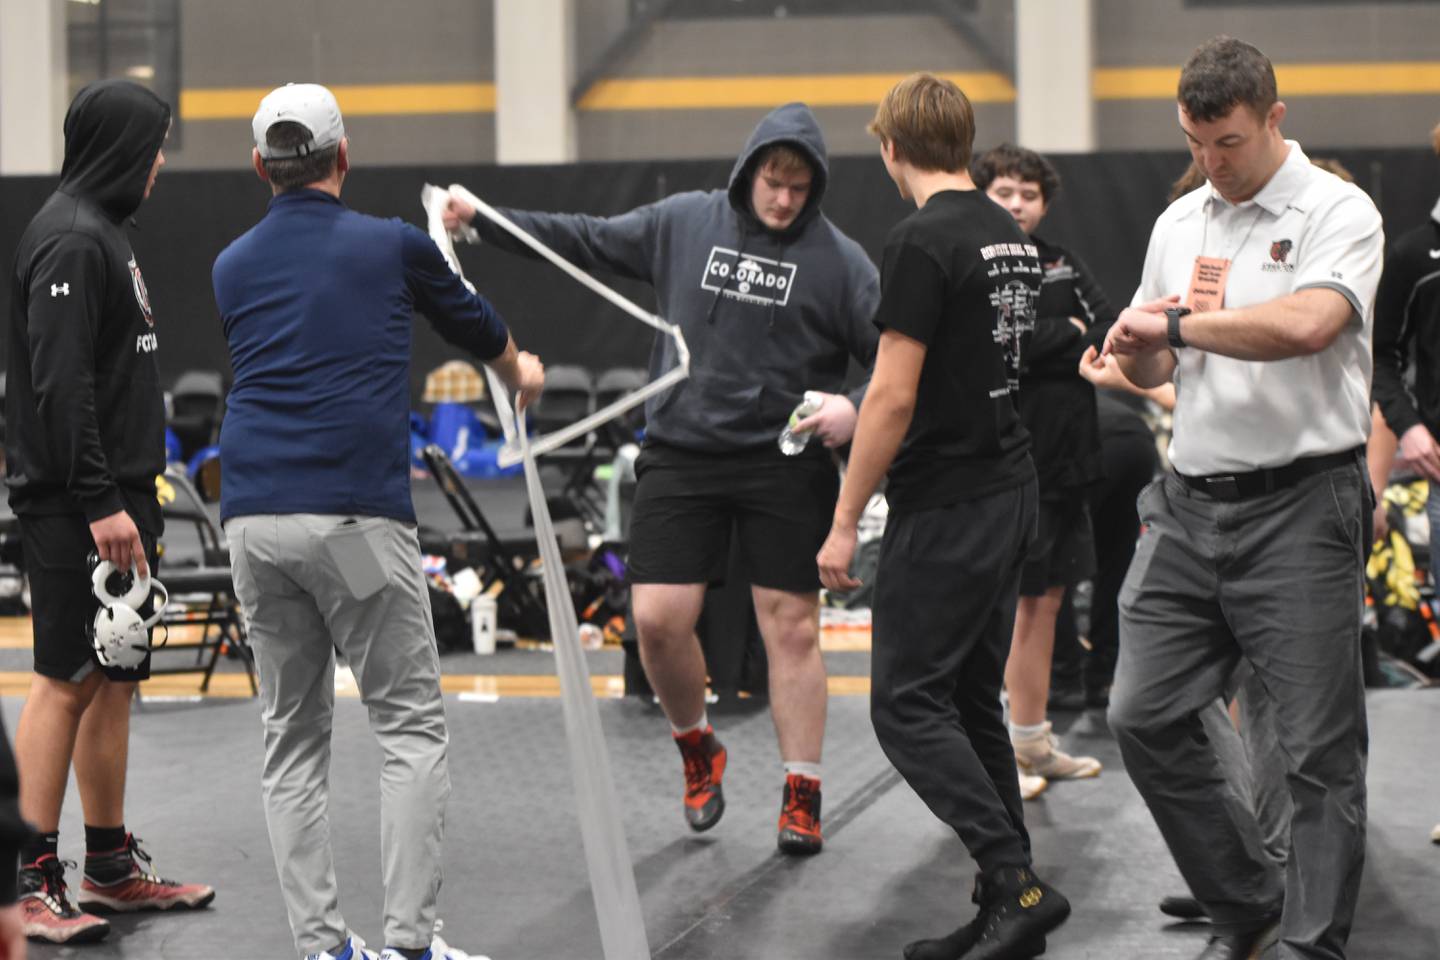 Wrestlers help employees tear down the mats before the finals.